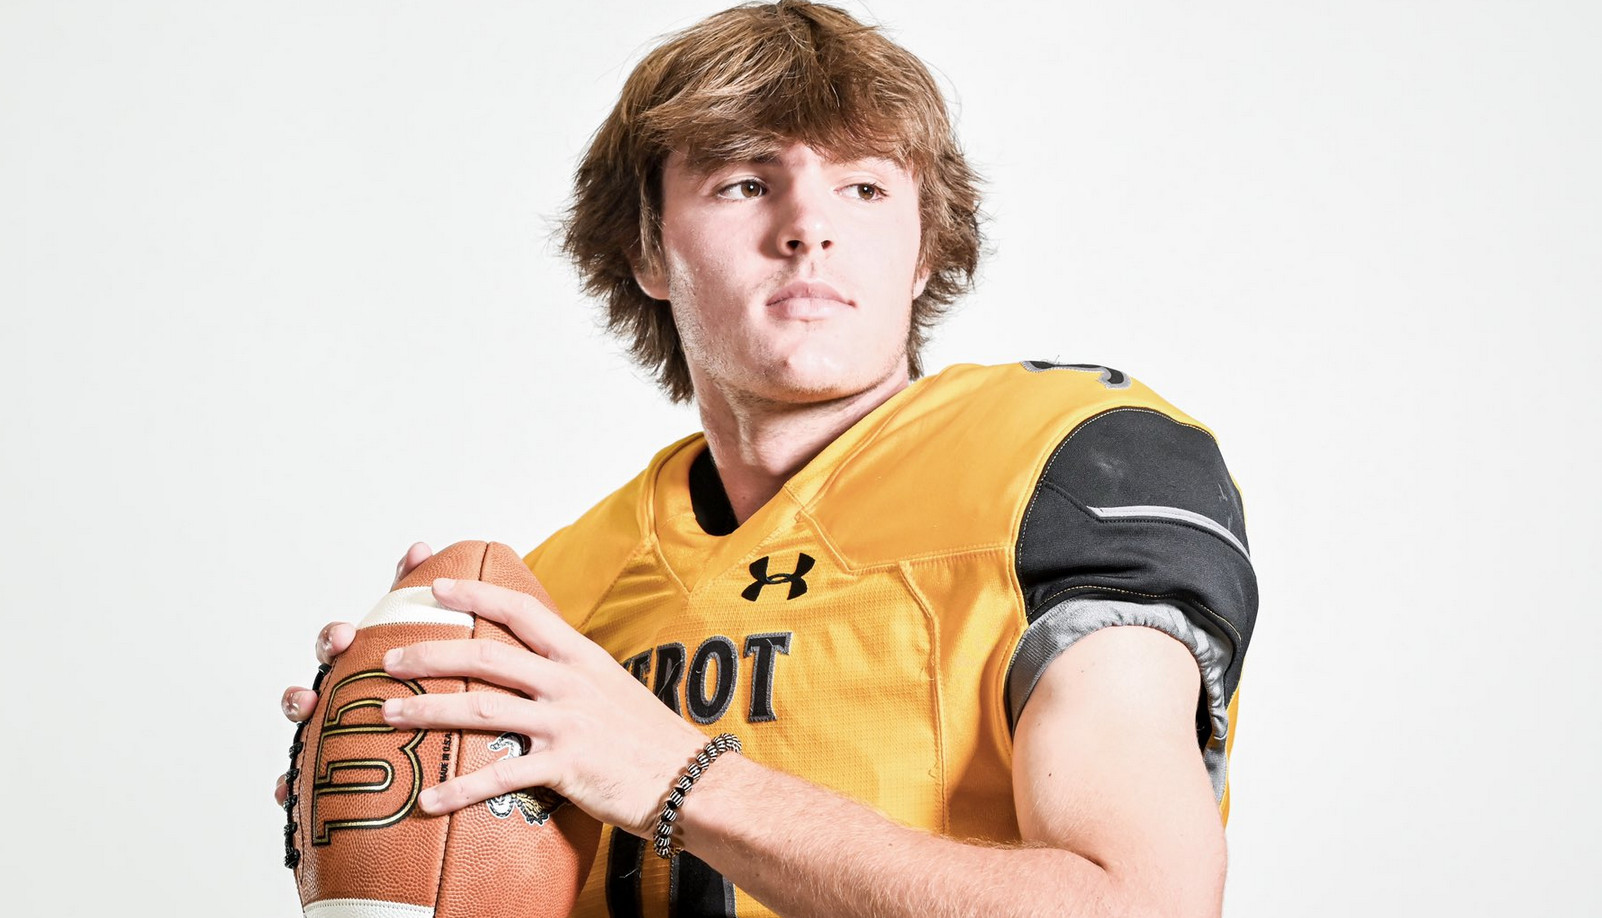 Bishop Verot sophomore quarterback Carter Smith is already breaking Lee County records and playing with poise beyond his years.